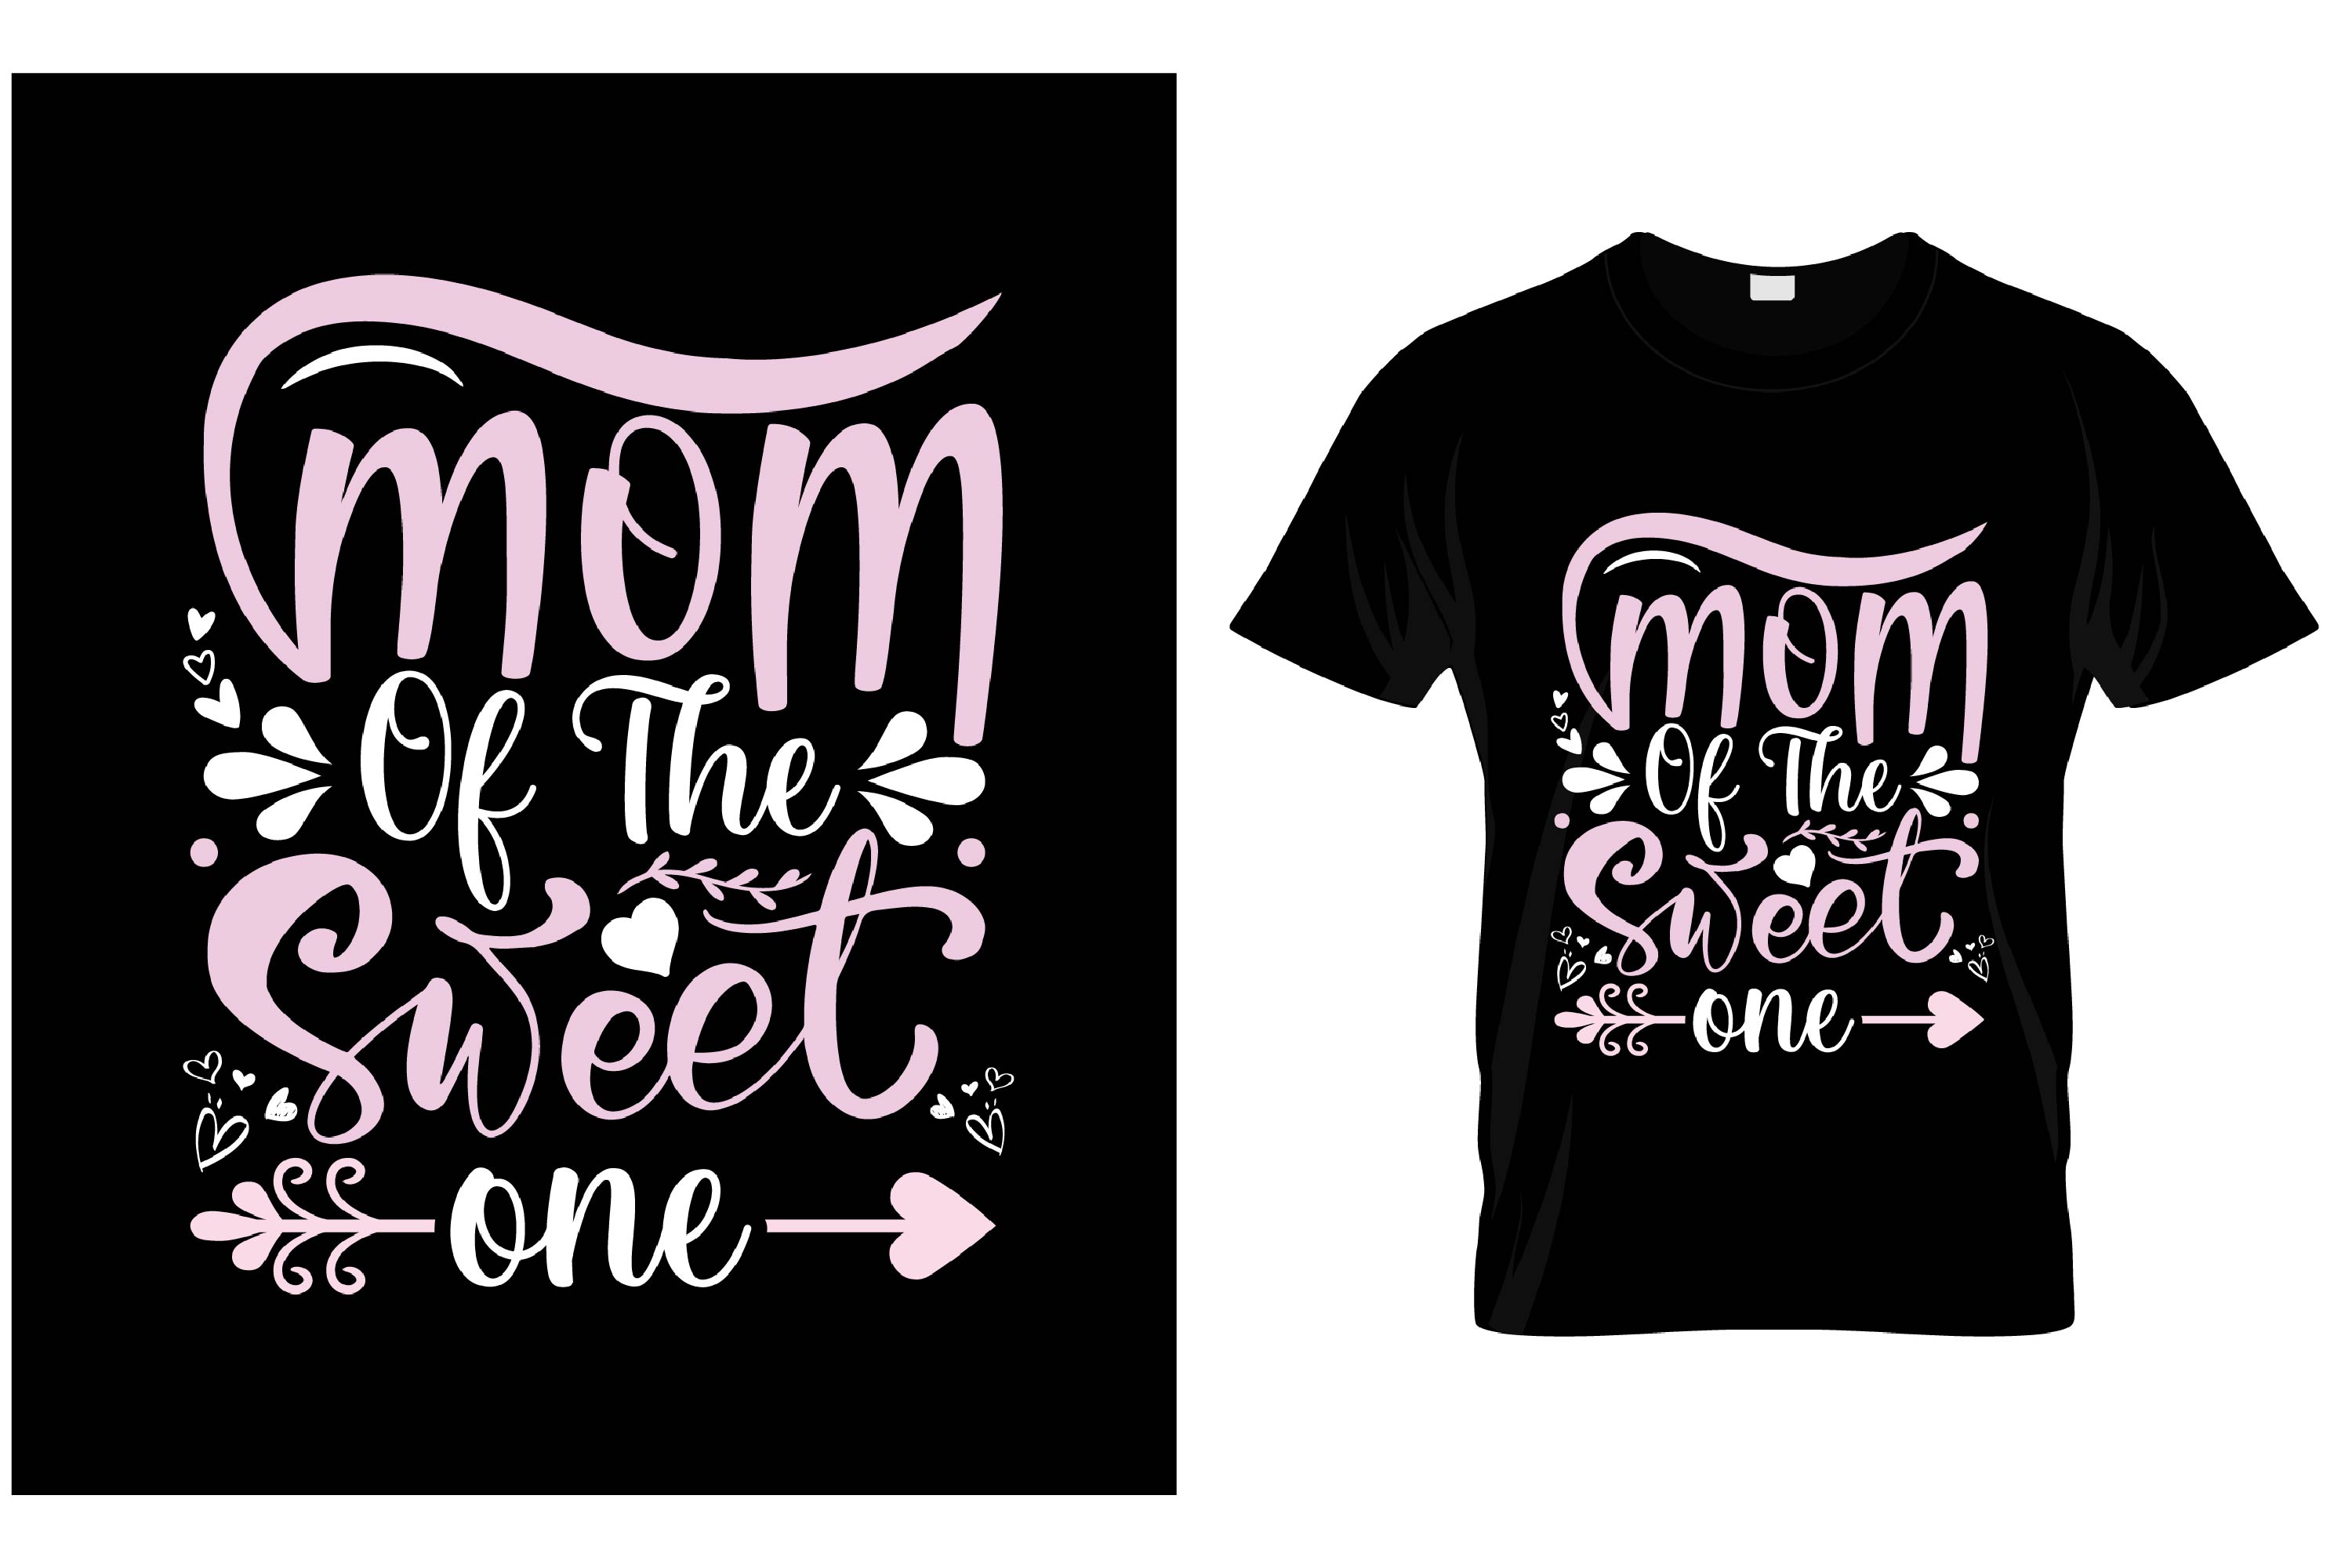 Image of a black t-shirt with a wonderful print of pink and white about mom.